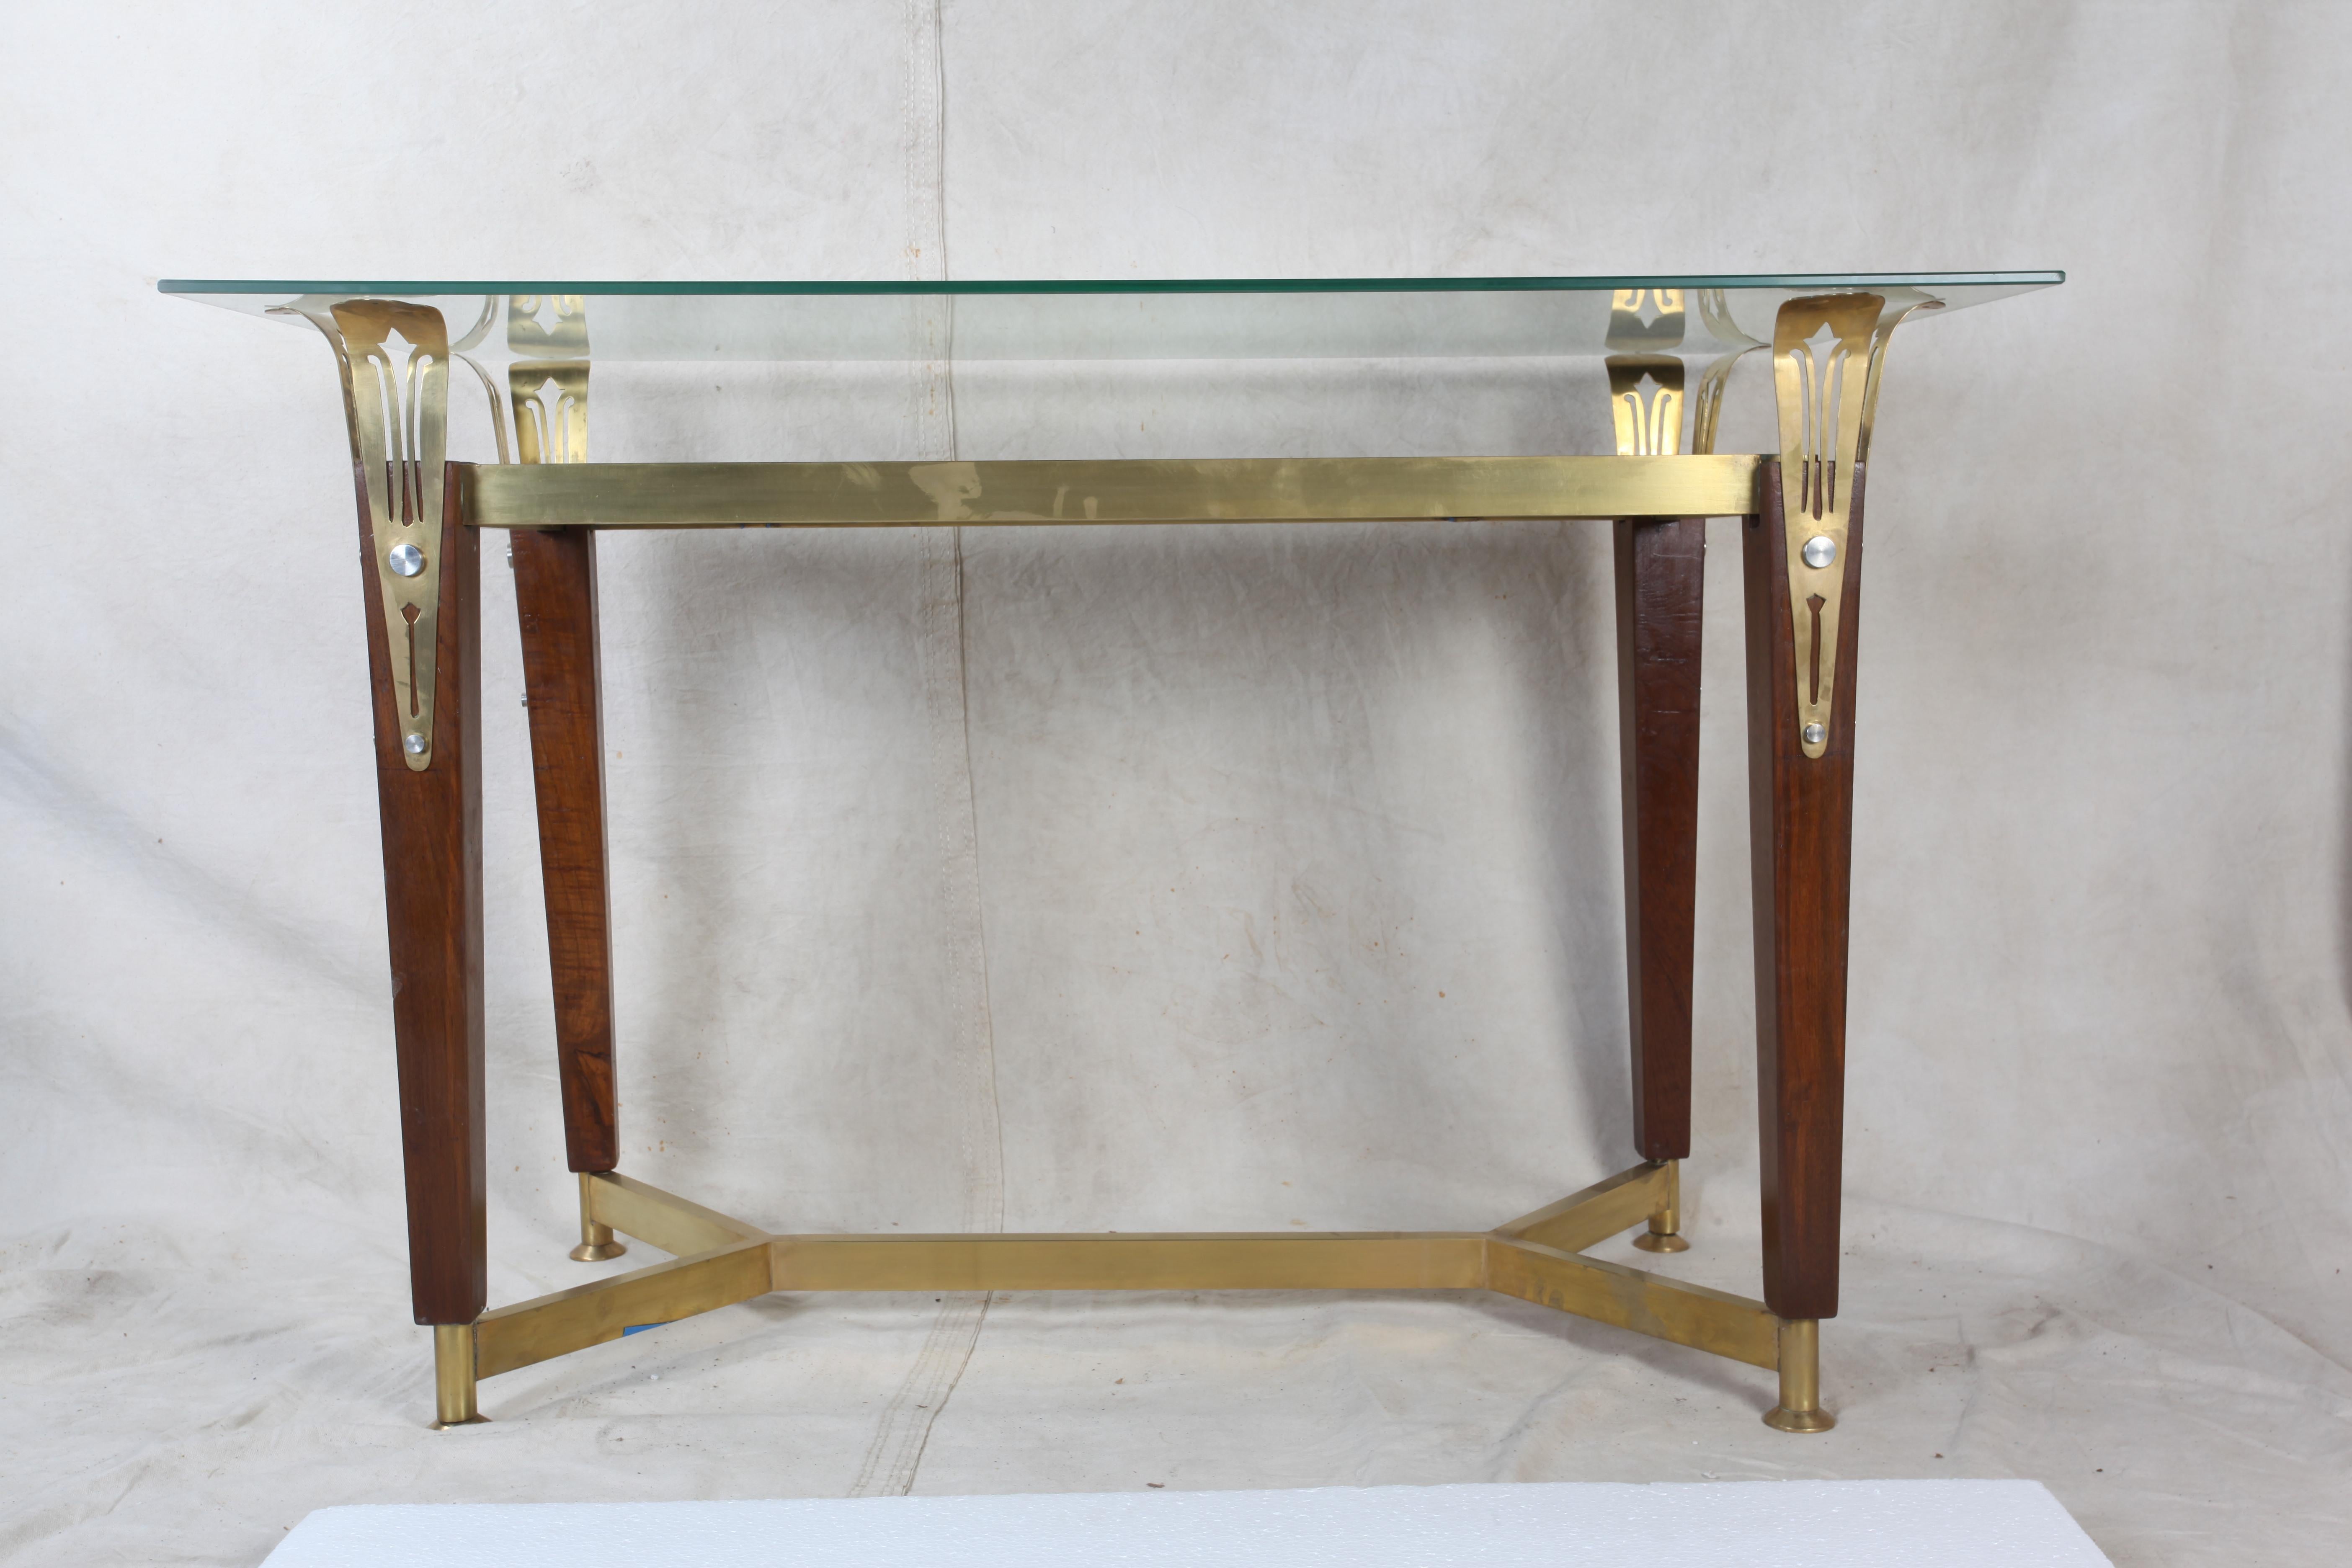 In that Classic, glamorous era of the early-mid 1900s, a lovely console table or desk with teak, brass and glass details. The legs are a tapered teak wood with brass feet and cross bars and cut brass tabletop supports. There is a mirror recessed in